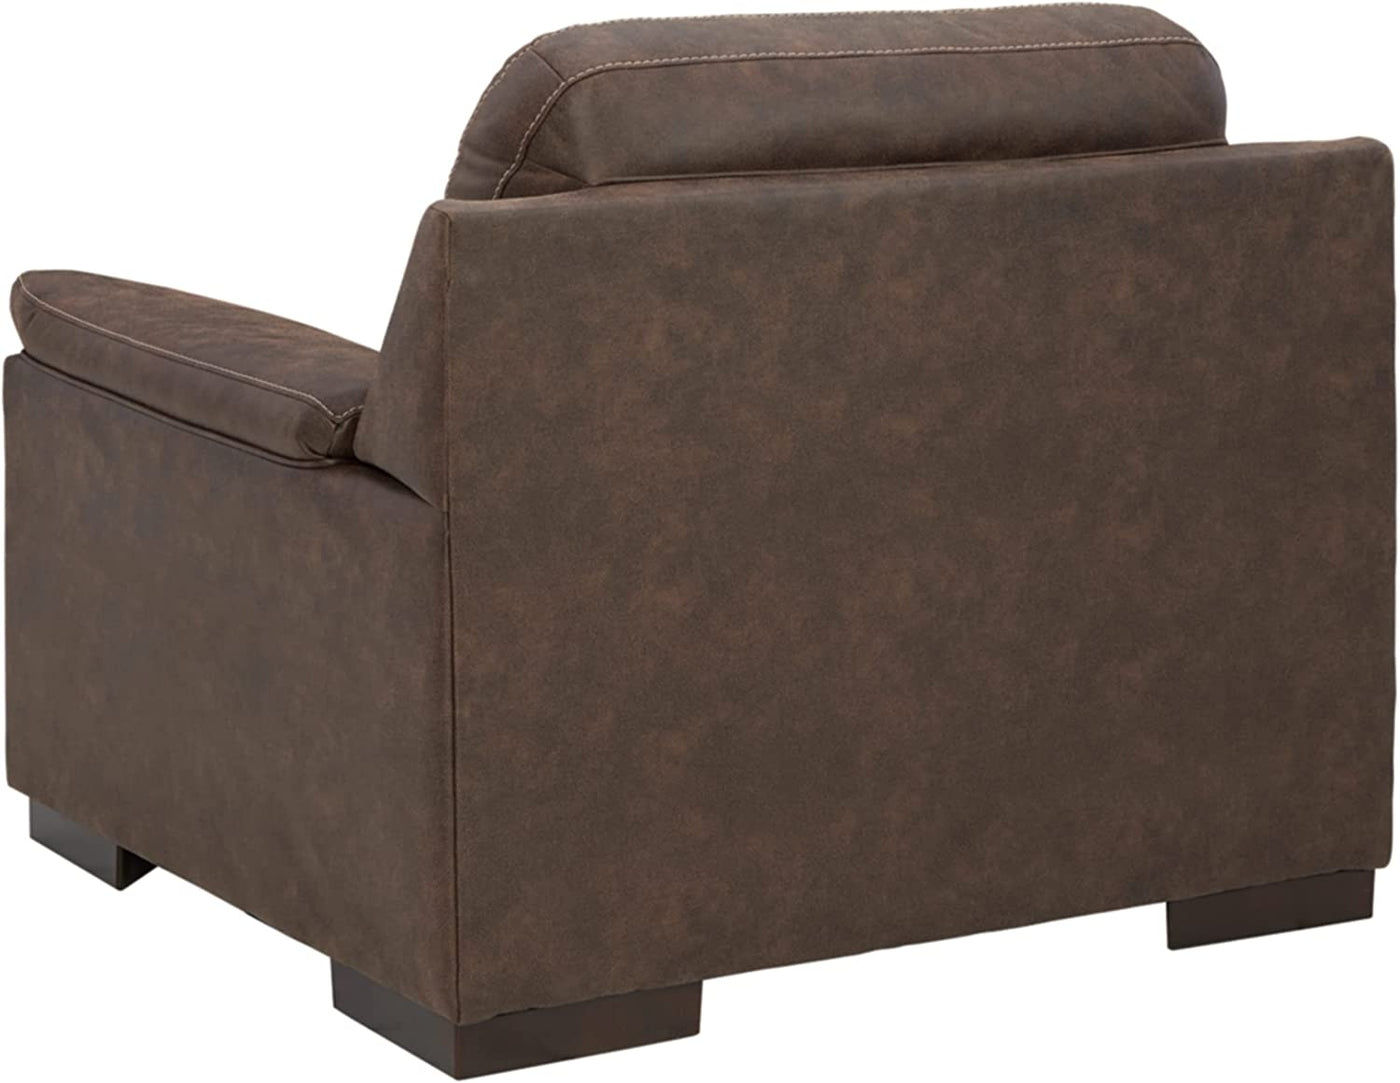 Ashley Maderla Modern Faux Leather Oversized Accent Chair, Walnut Brown-$275